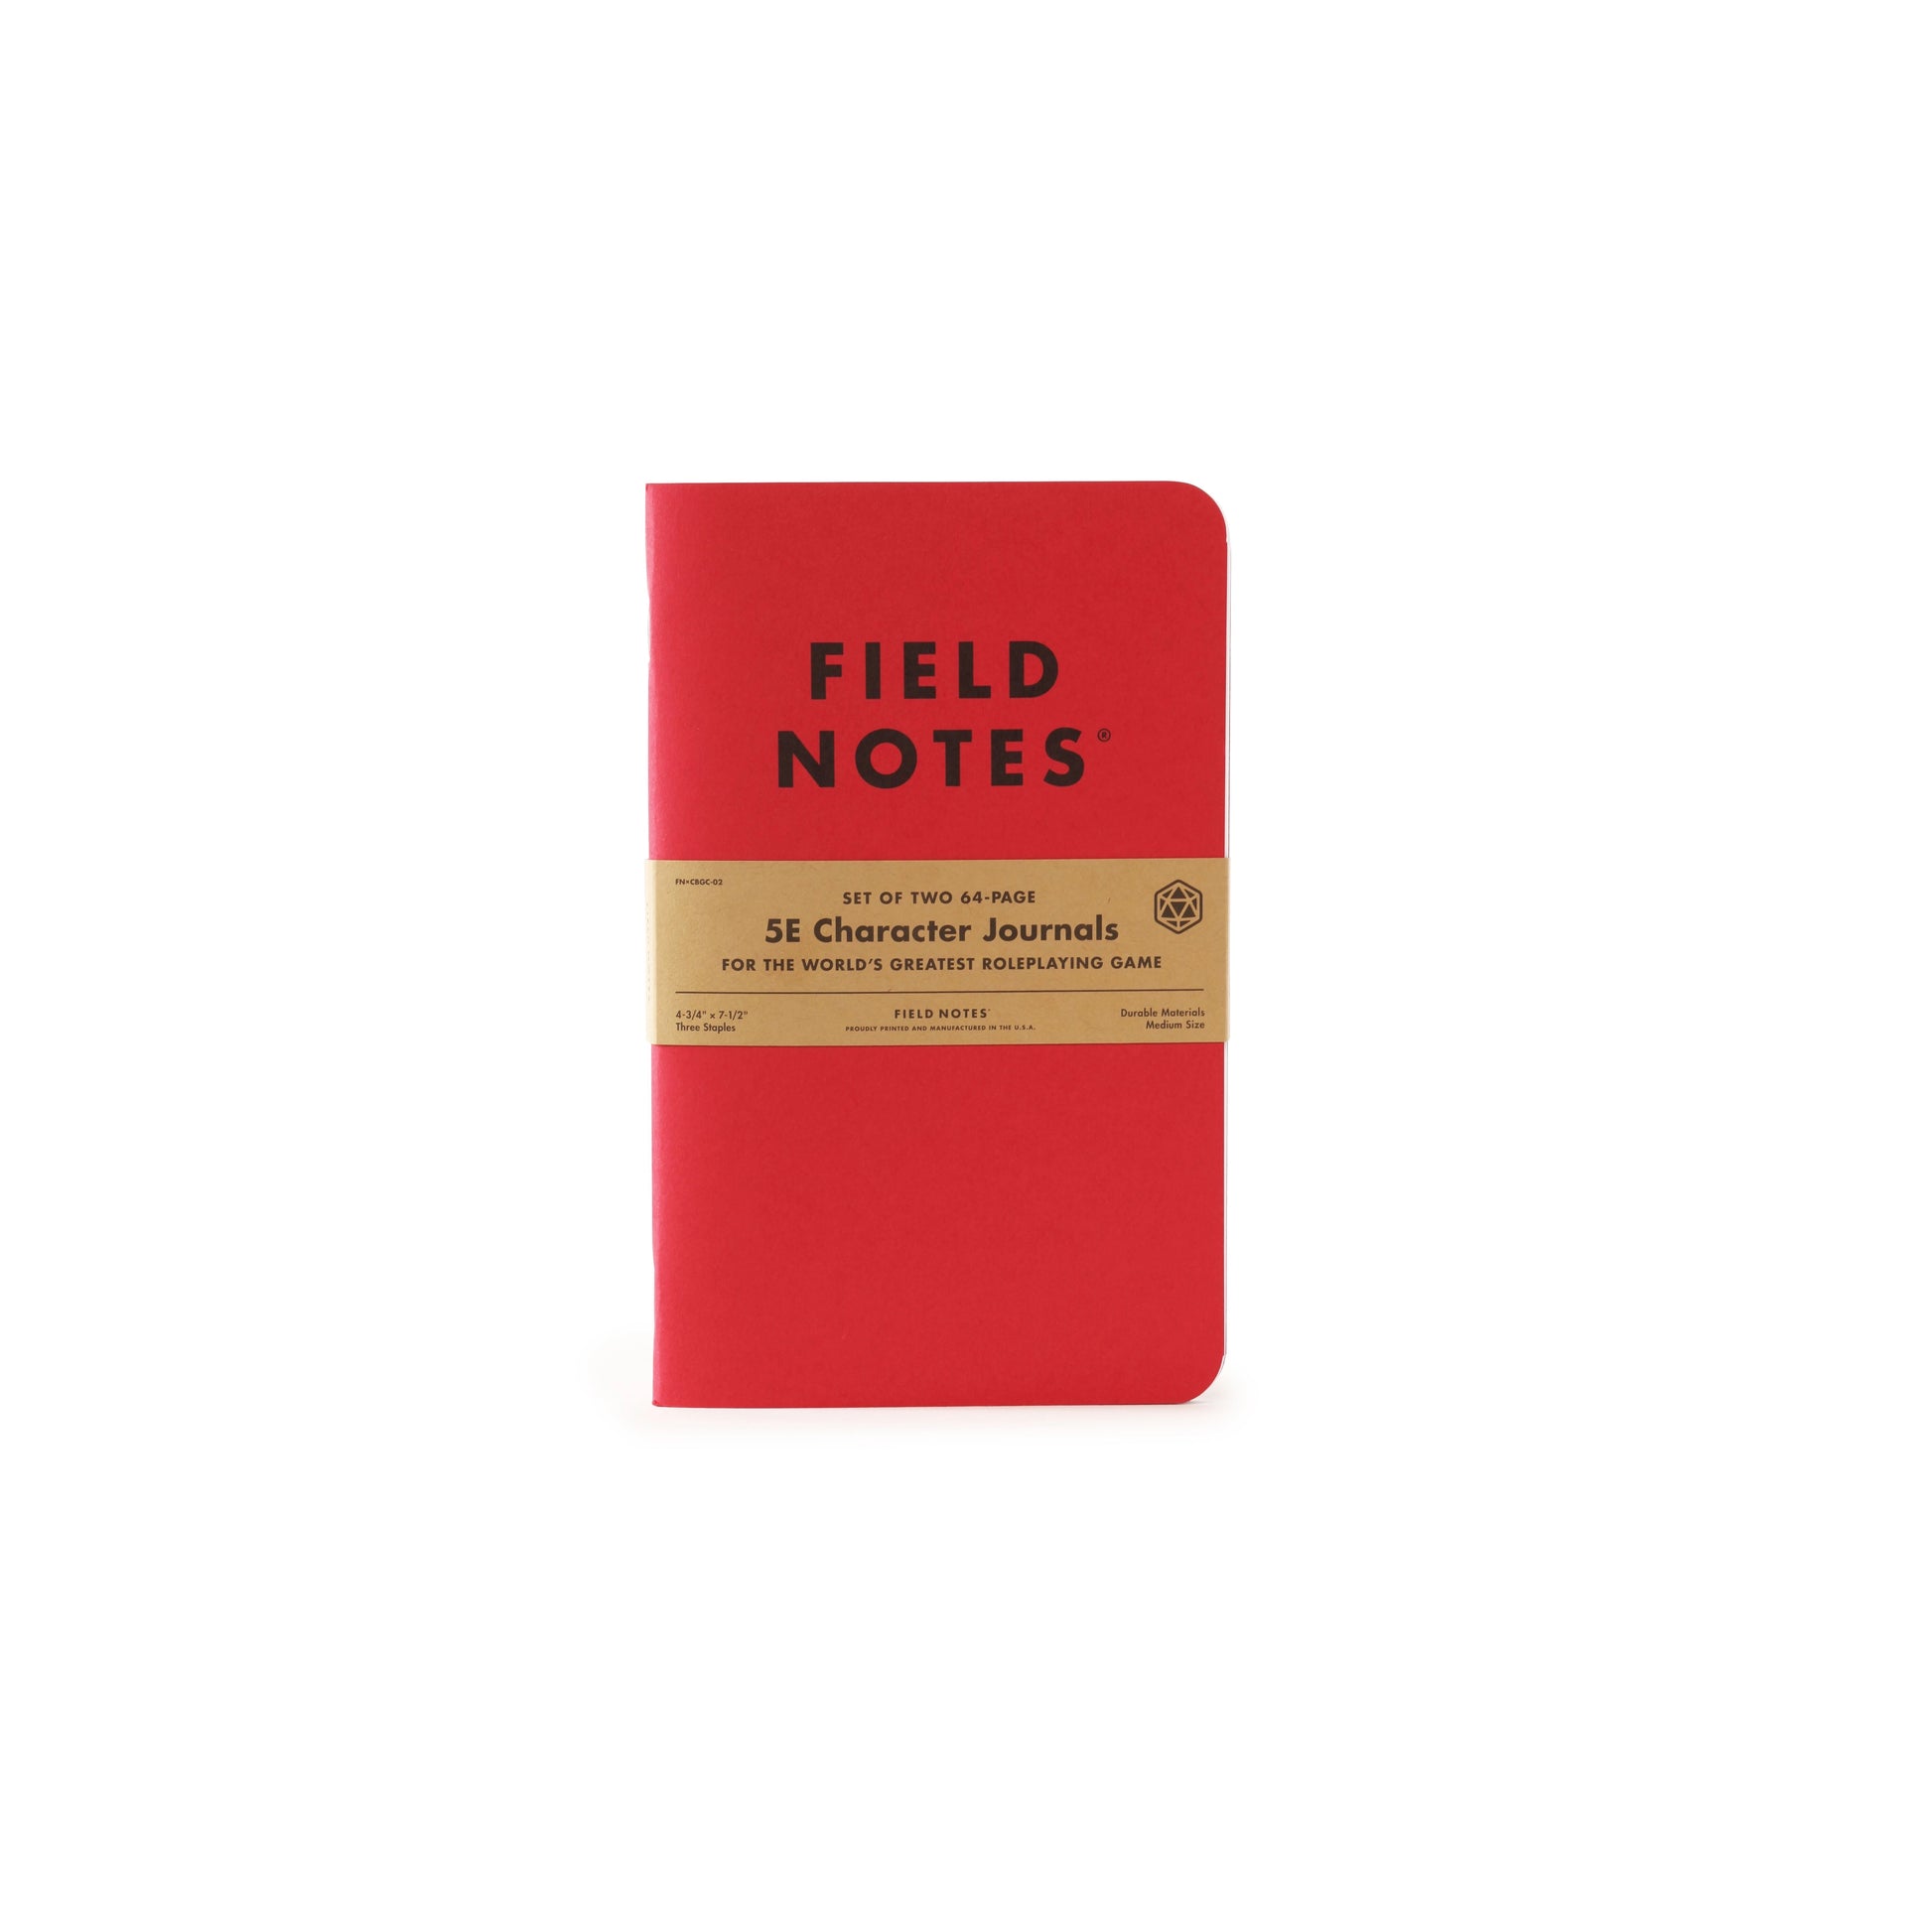 Field Notes Dungeons and Dragons 5E Game Journals - Character Journal by Field Notes - K. A. Artist Shop